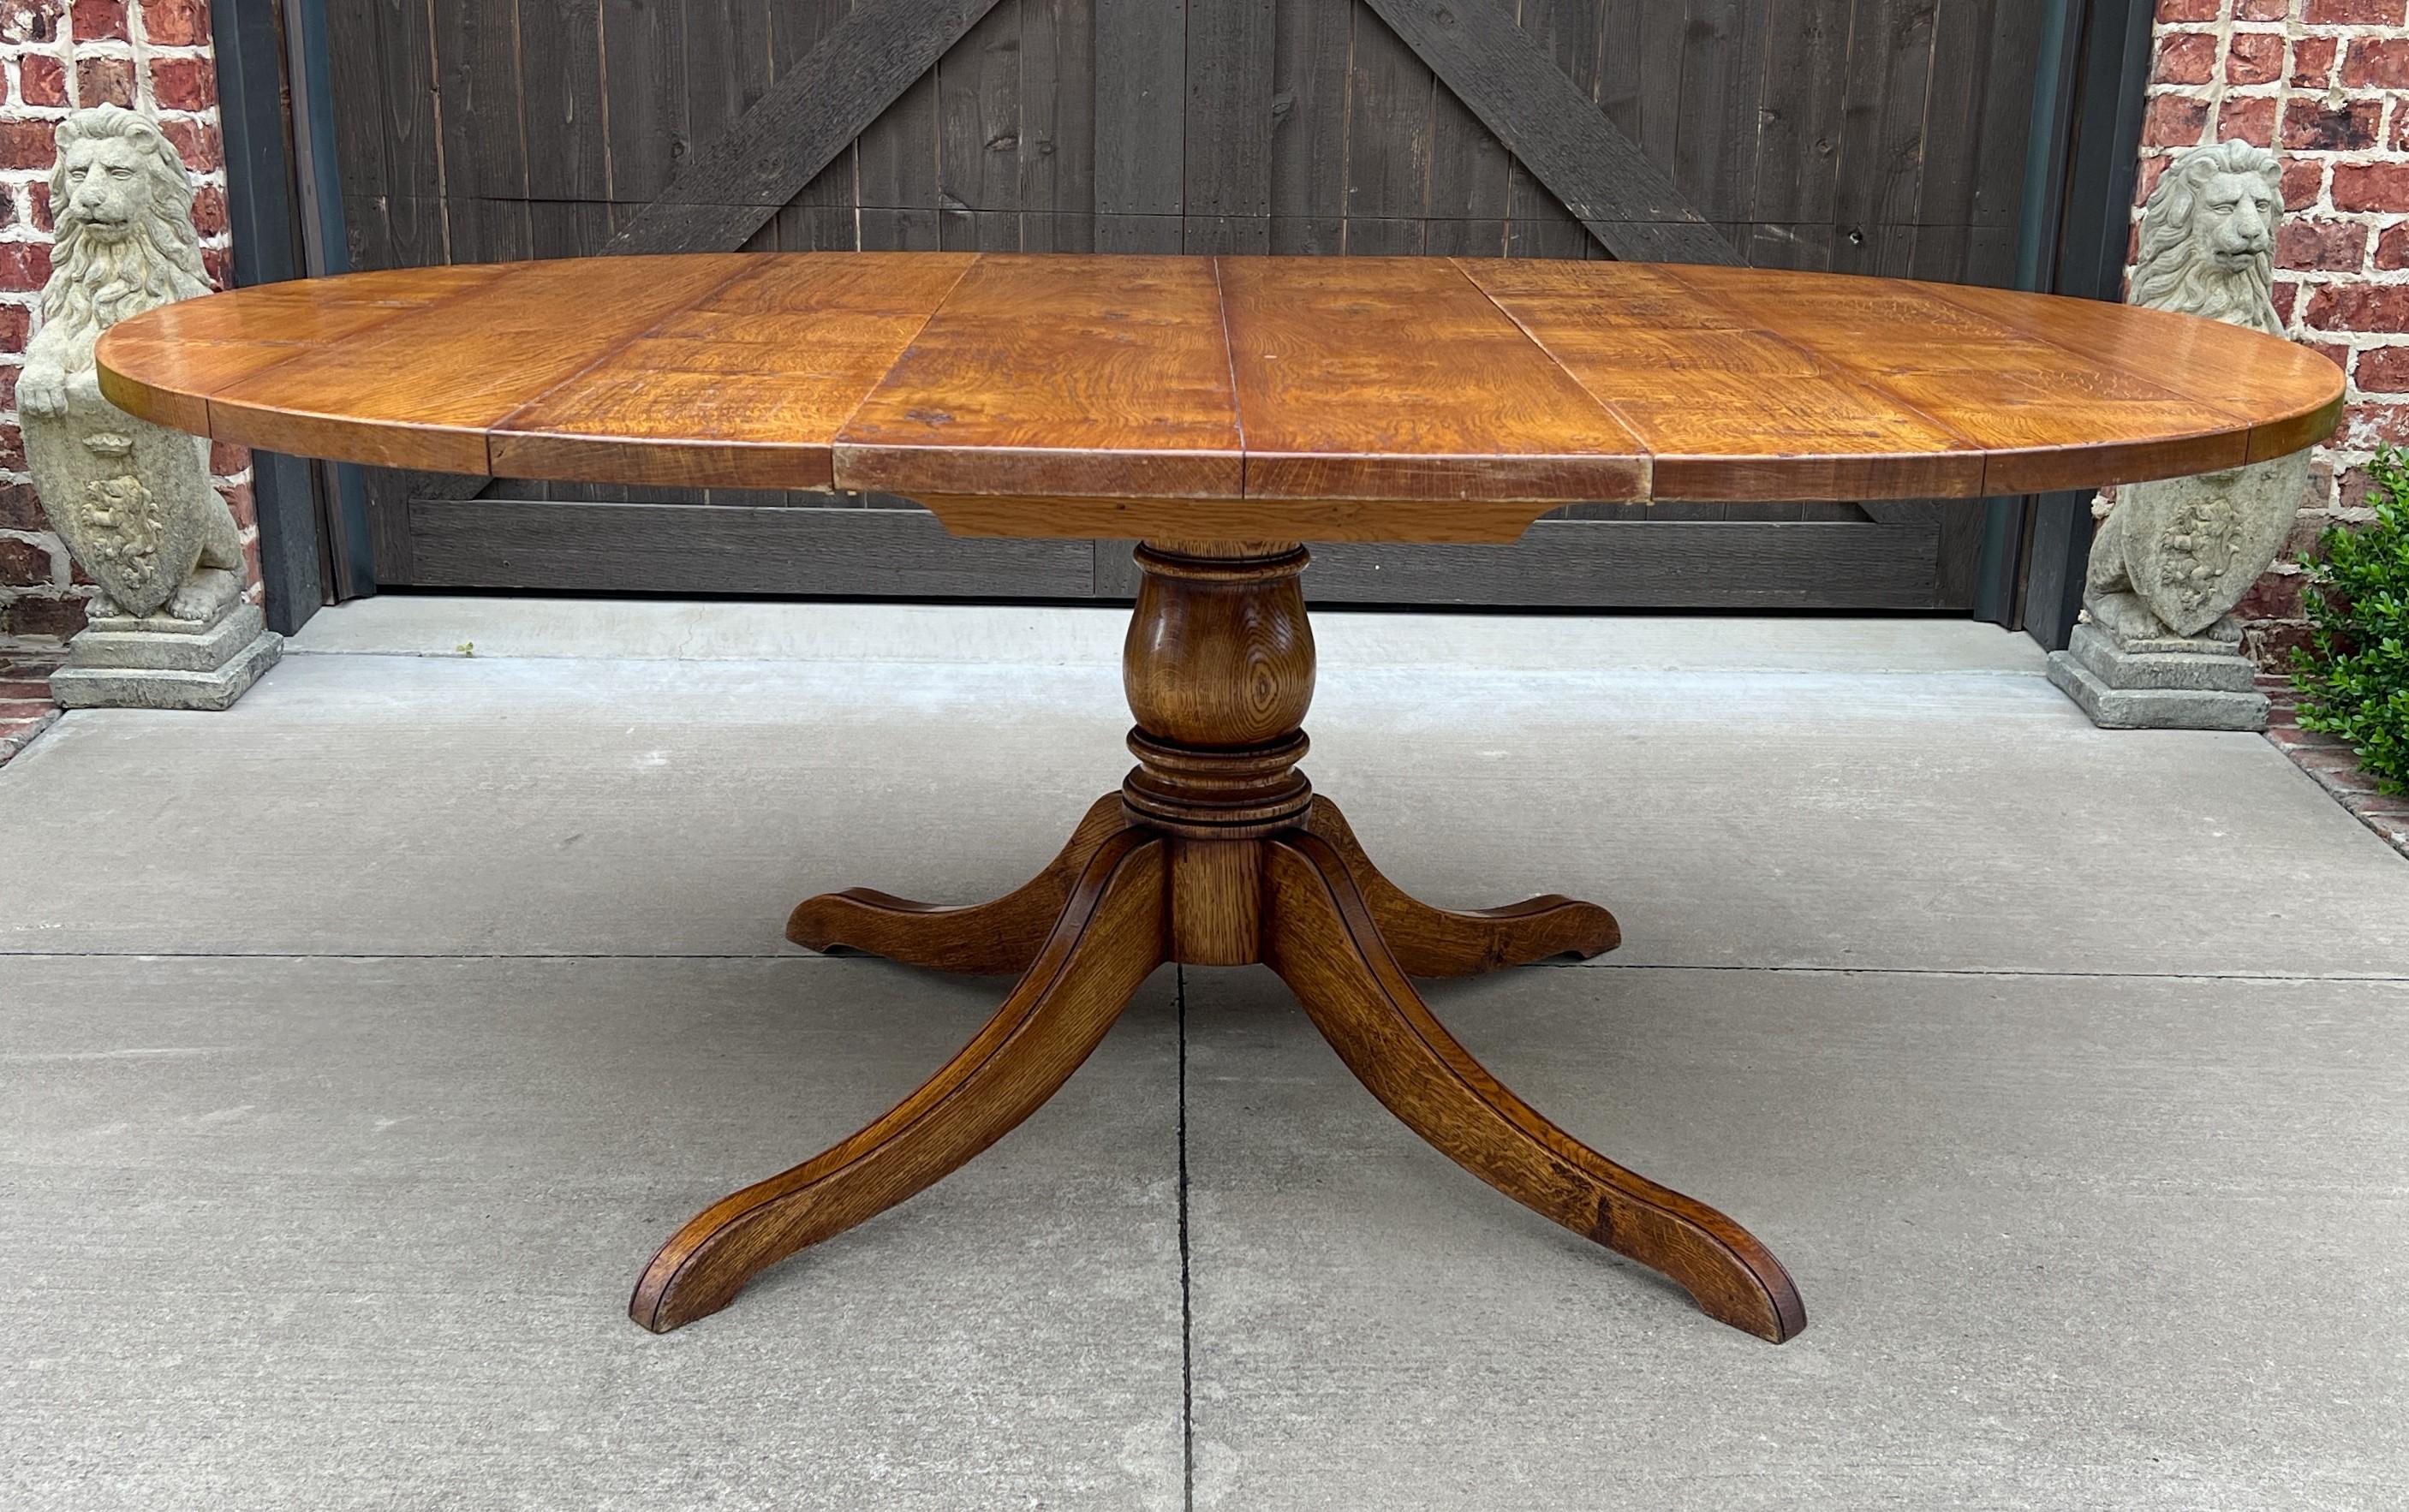 20th Century Midcentury English Round/Oval Dining Table Pedestal Base with Leaf Oak, c. 1940s